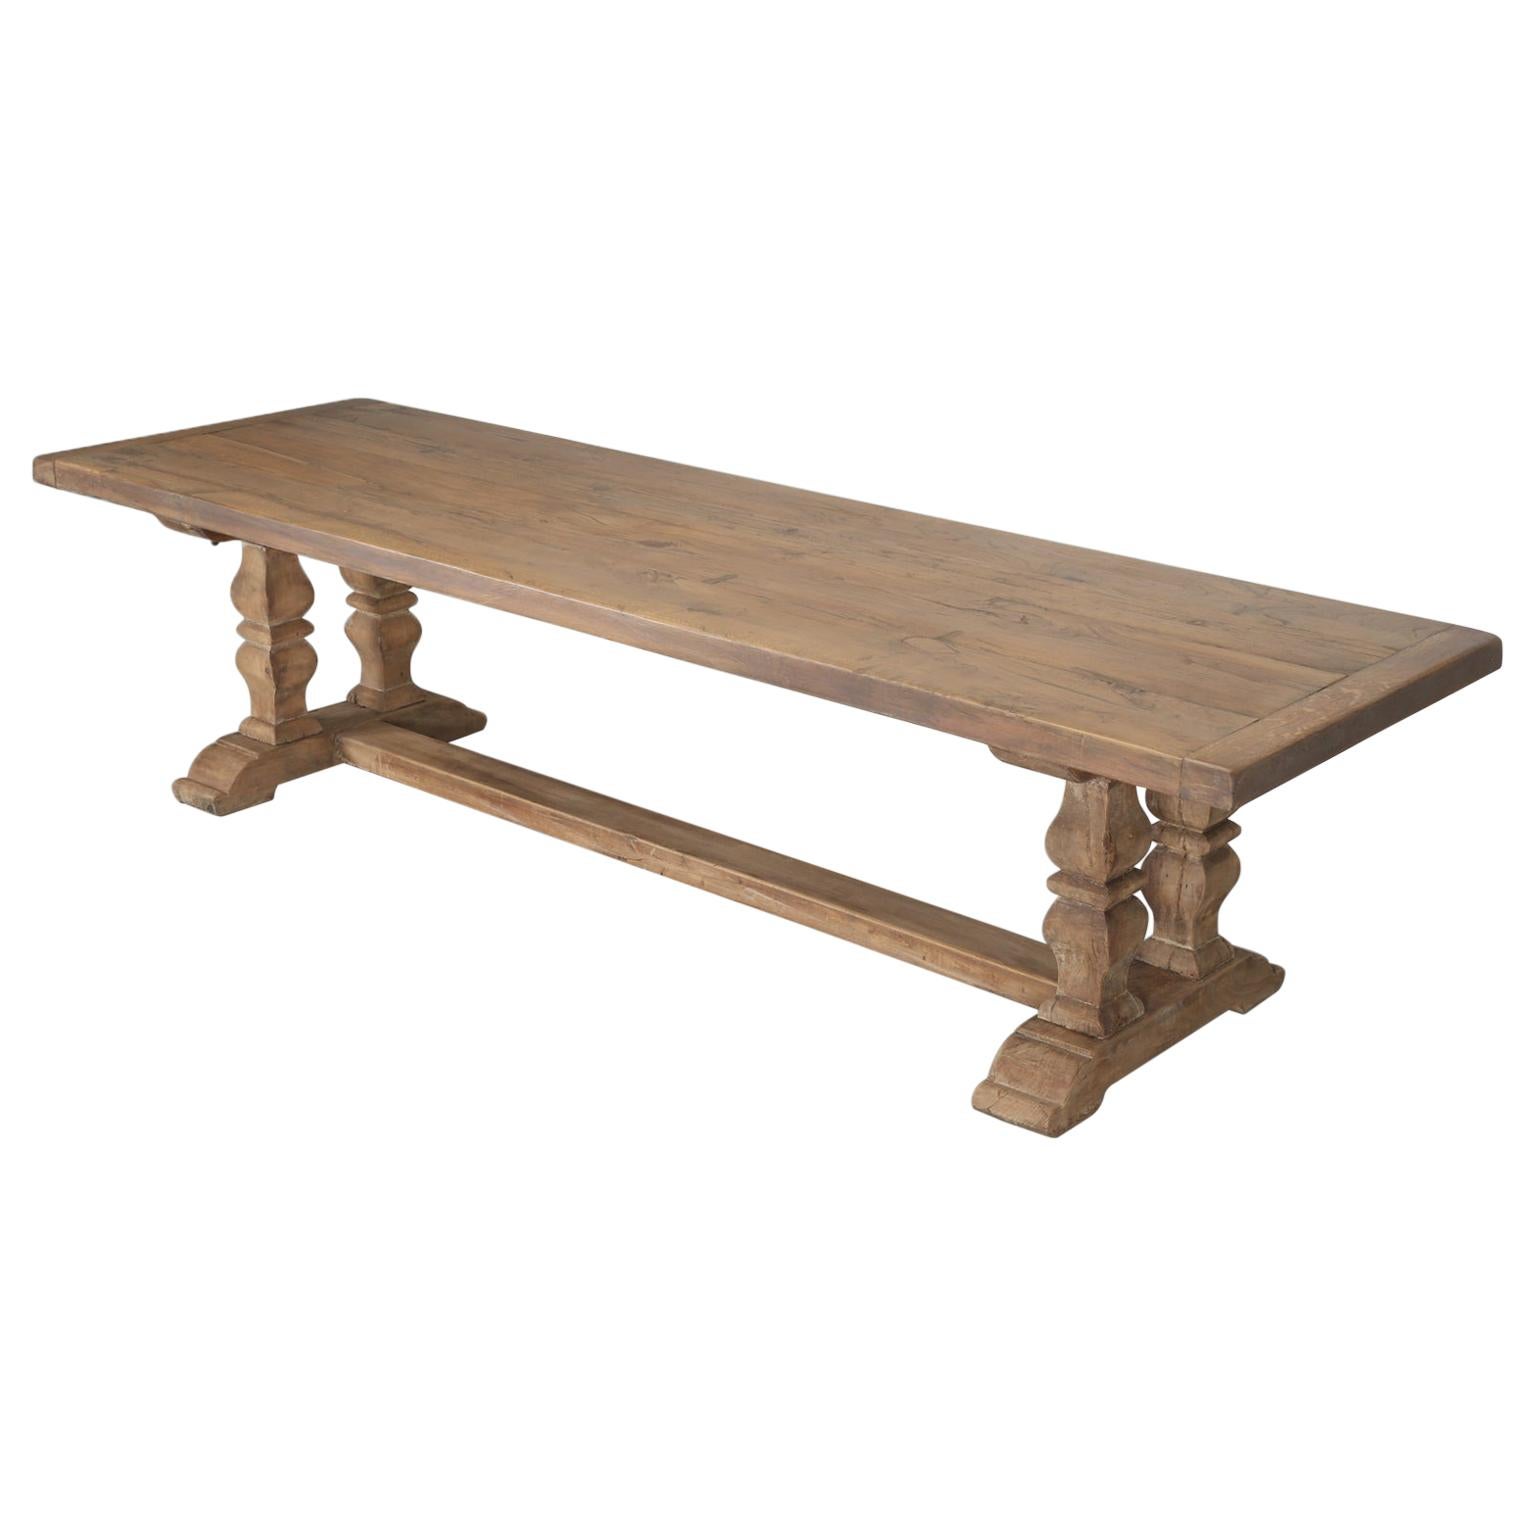 Country French Oak Dining Table Restored Structurally, Cosmetically Original